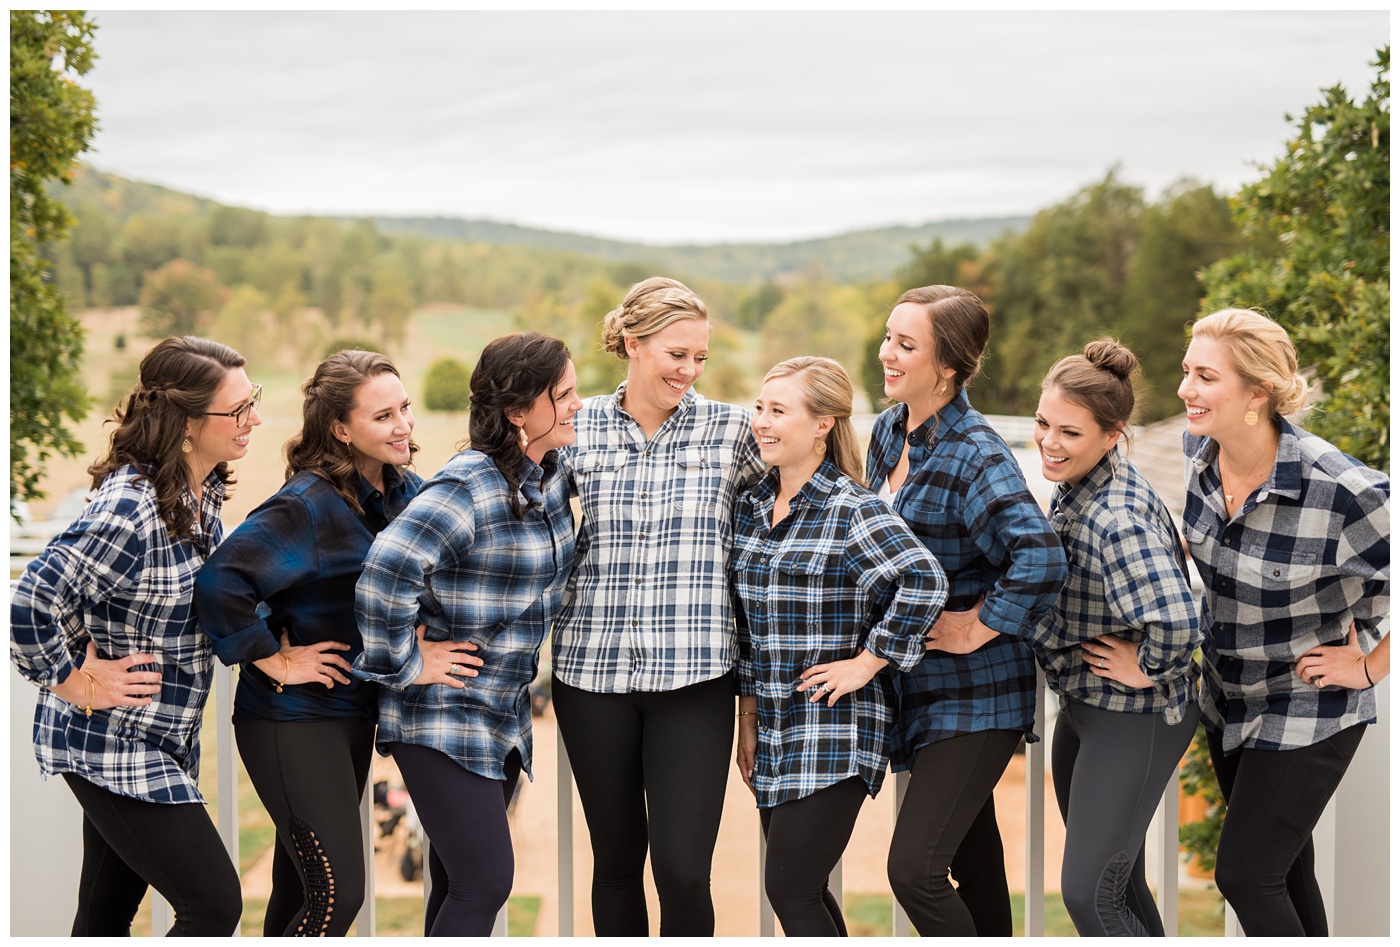 Bridal party in Flannel at Fall wedding in Charlottesville VA 